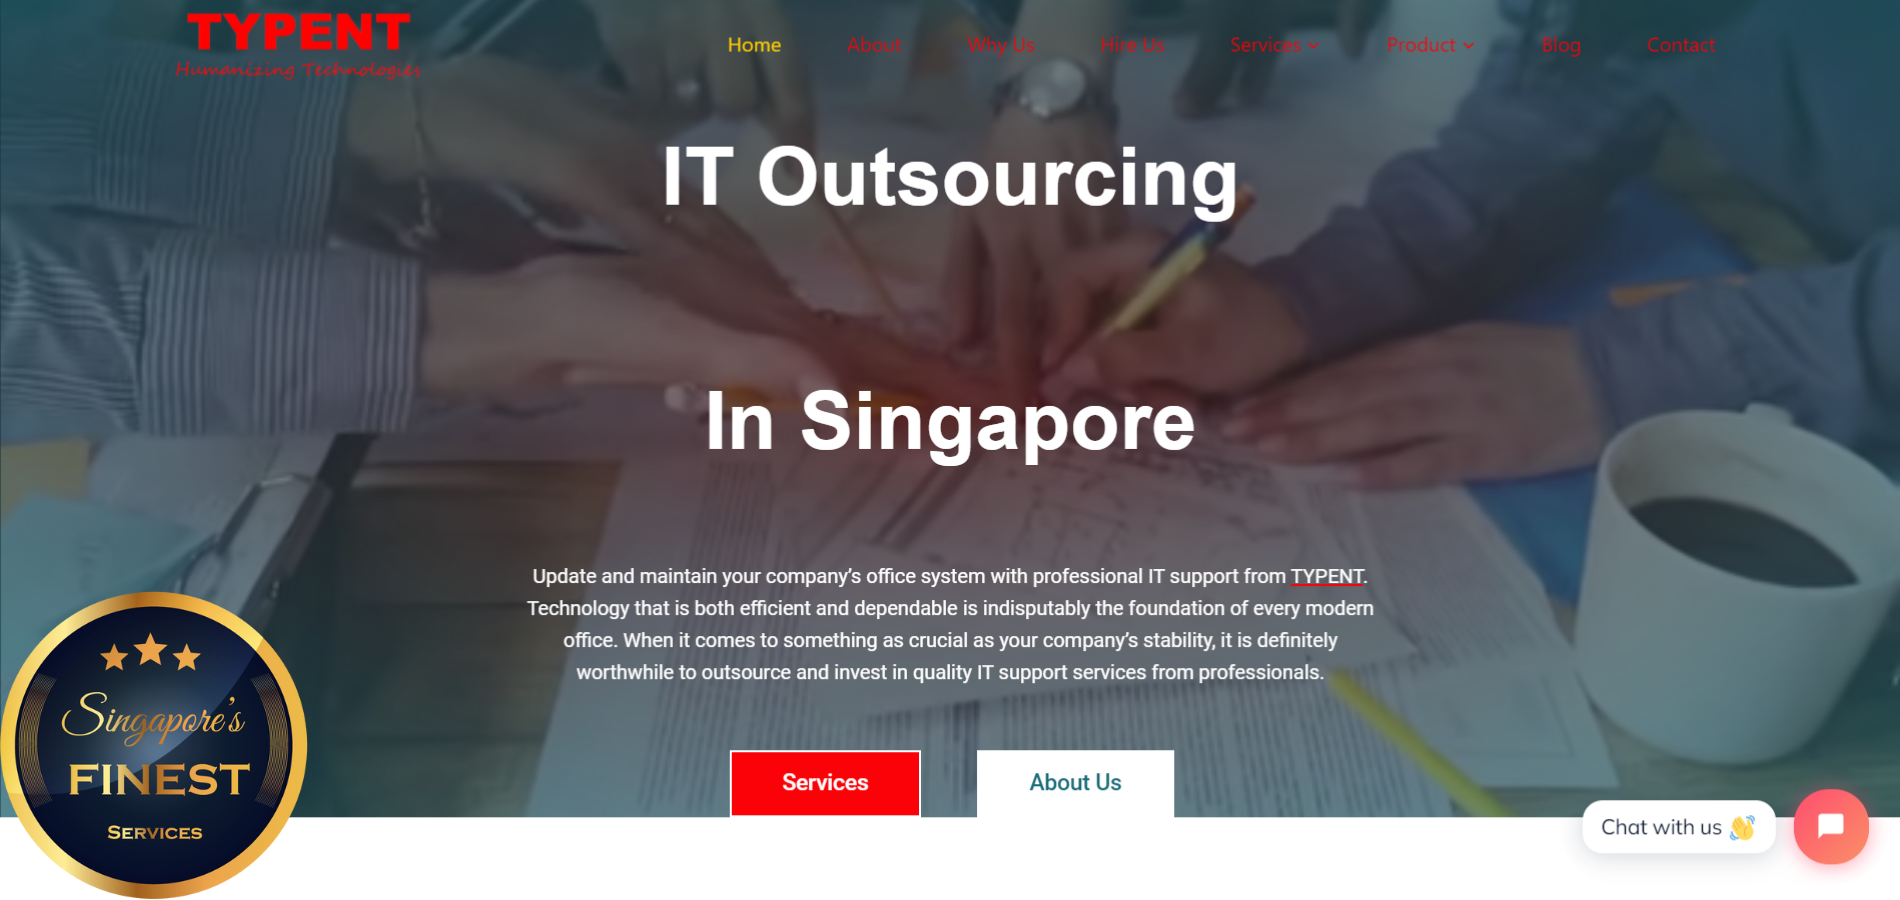 The Finest IT Outsourcing Companies in Singapore